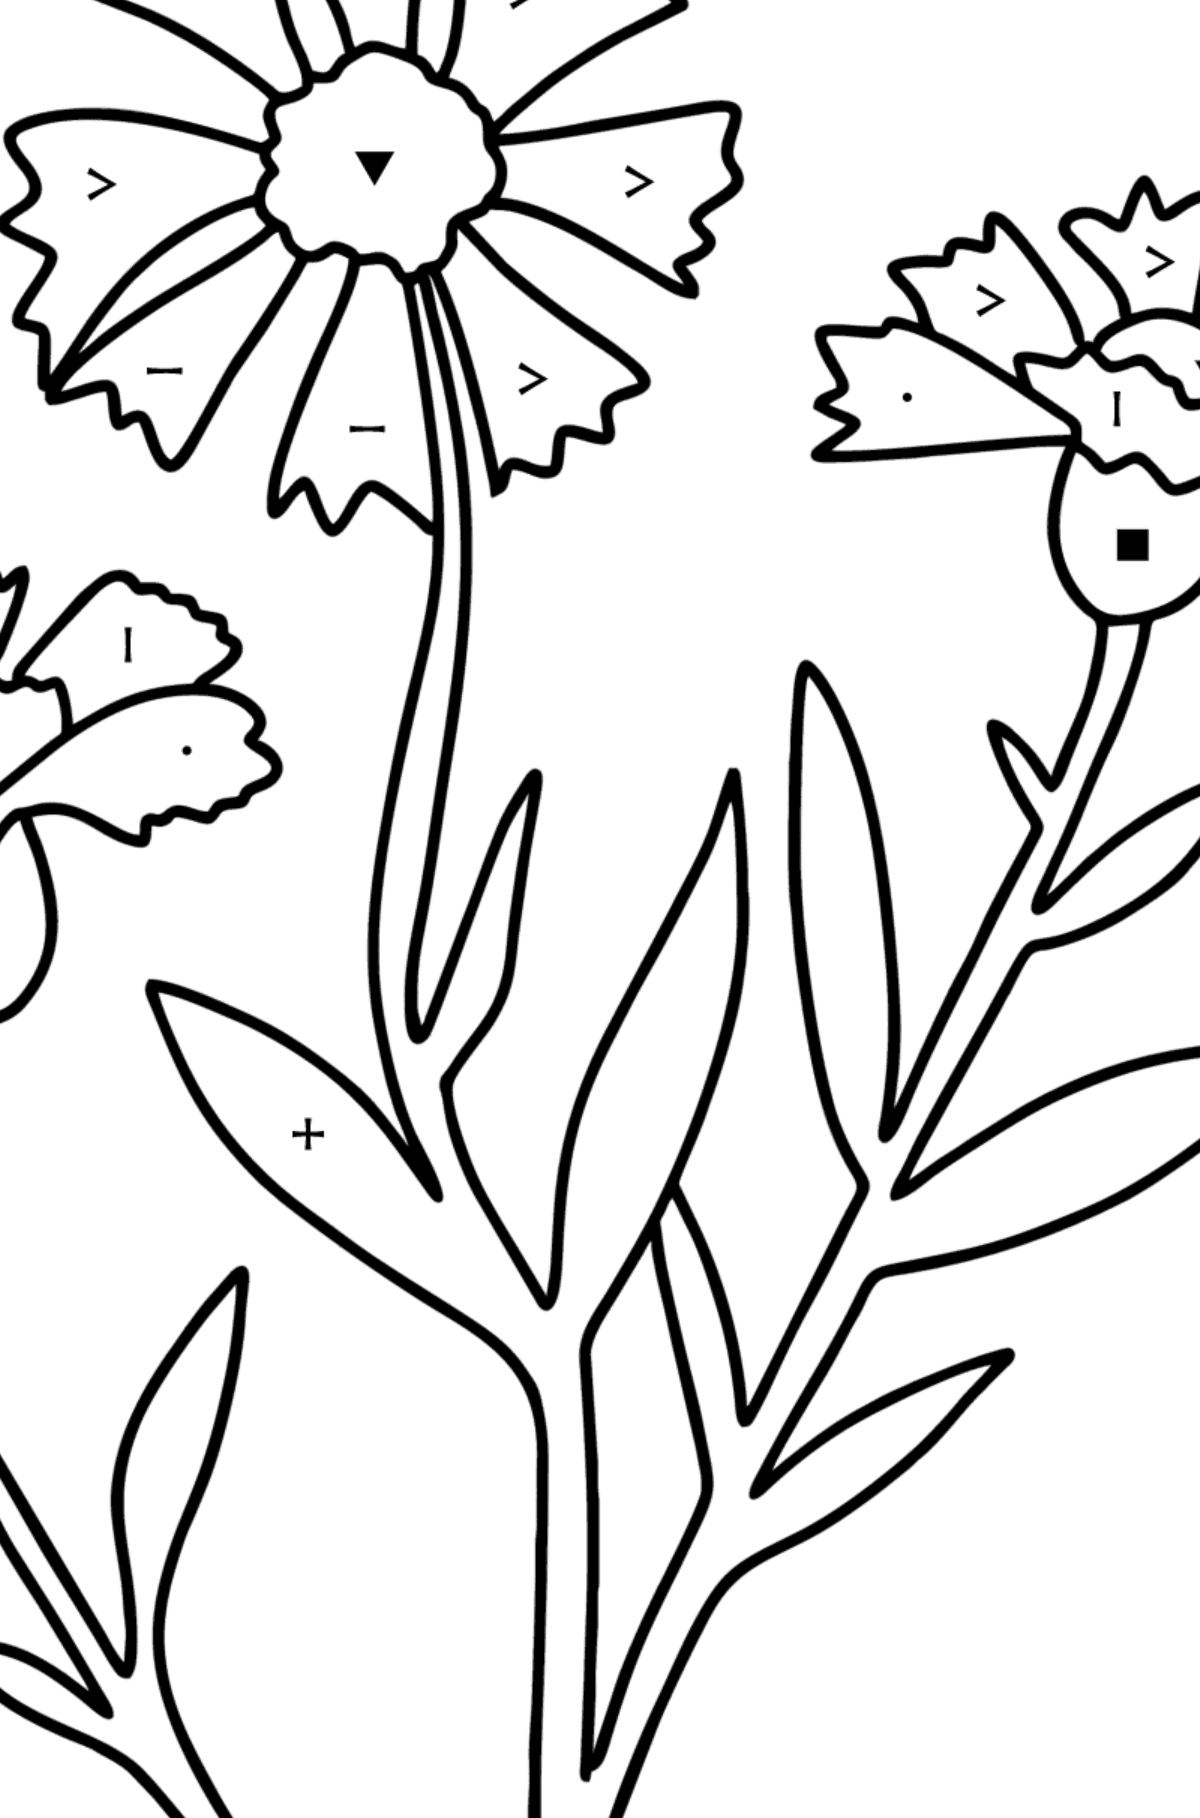 Knapweed coloring page - Coloring by Symbols for Kids